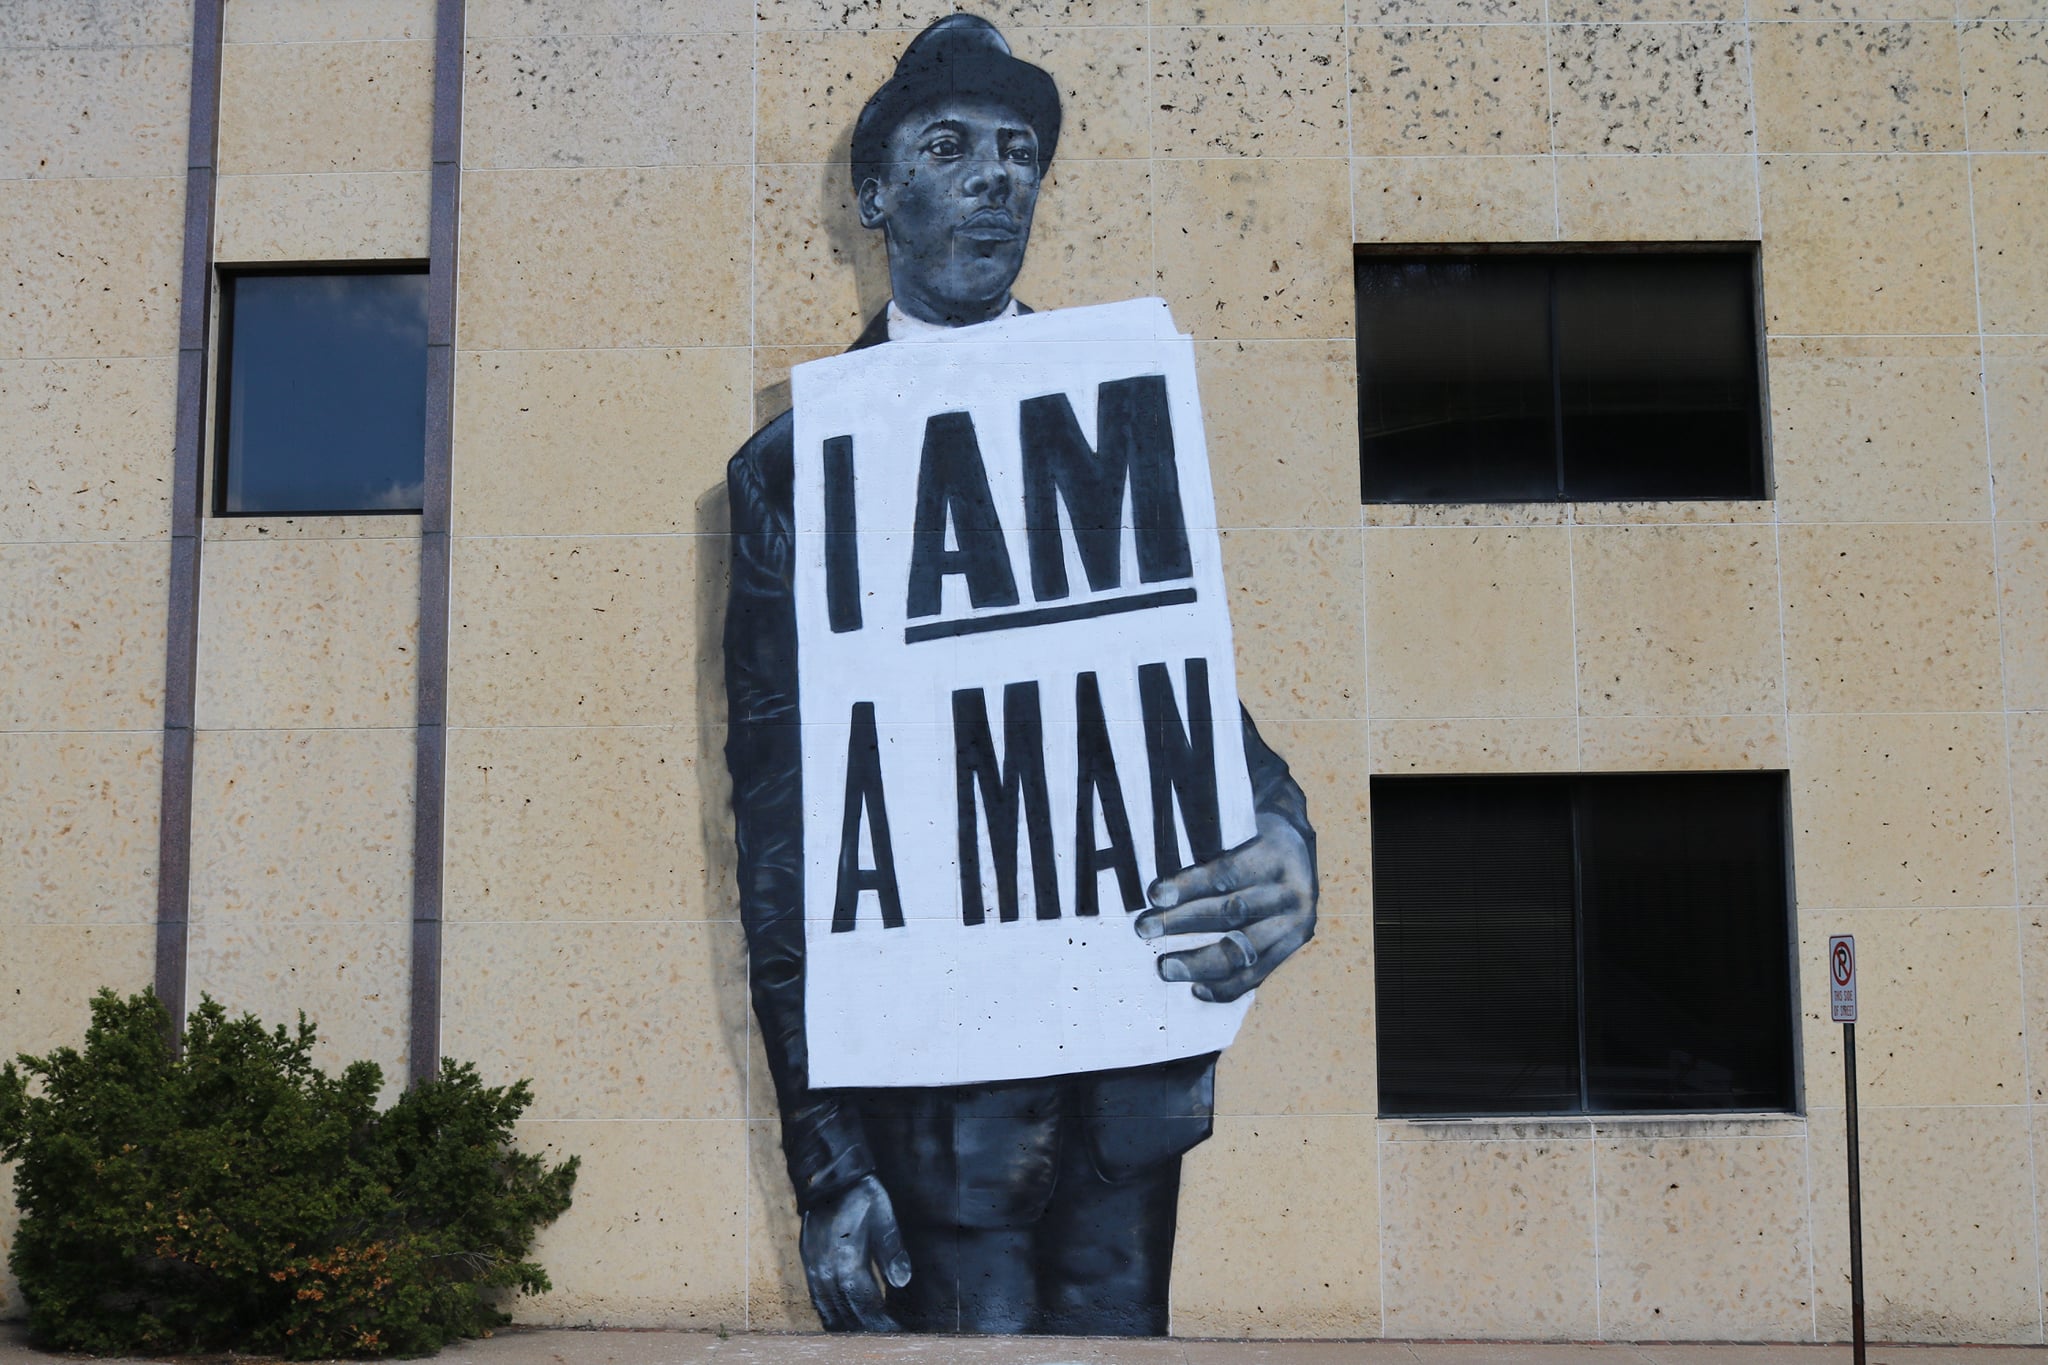 A Temporary exhibition of Dana Harrison's "I Am A Man" mural appears at the corner of Bluff & 8th Streets in downtown Dubuque; Image courtesy of Dubuque Museum of Art, August 2021